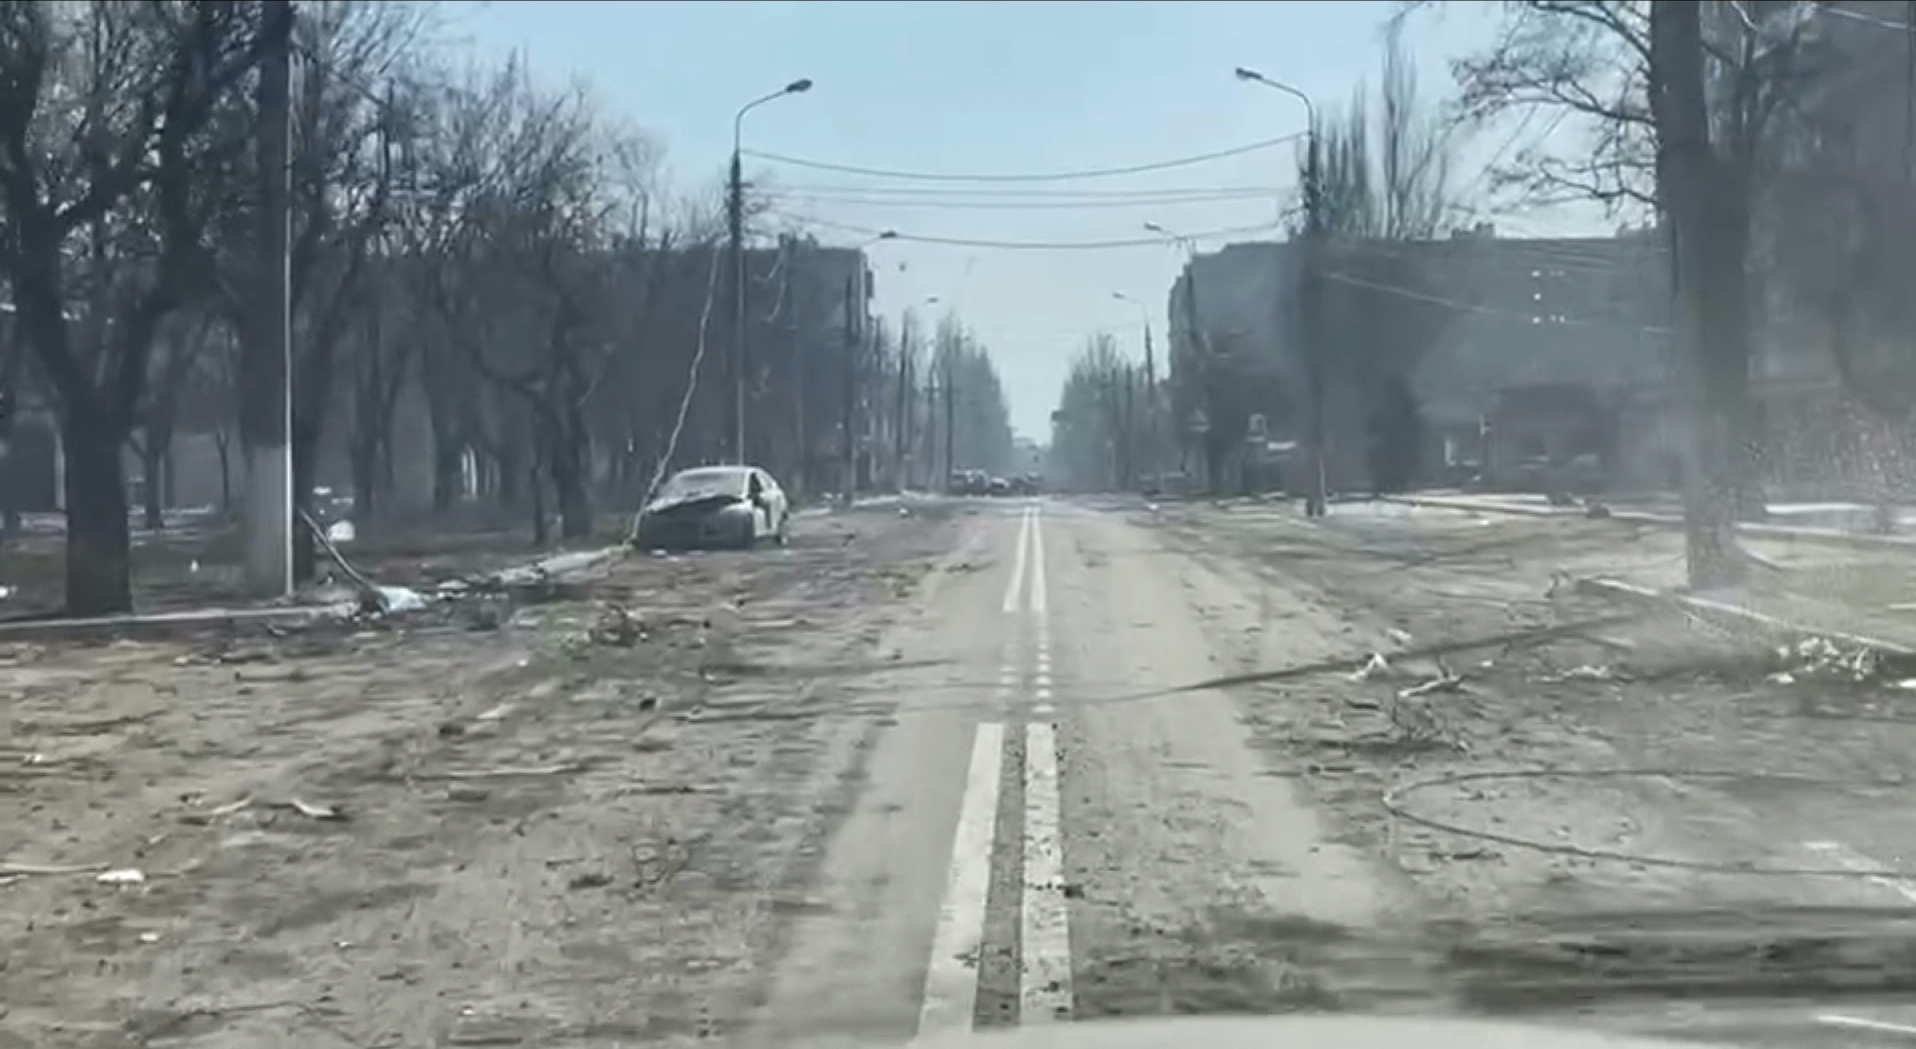 View of Mariupol from a video obtained by CNN.